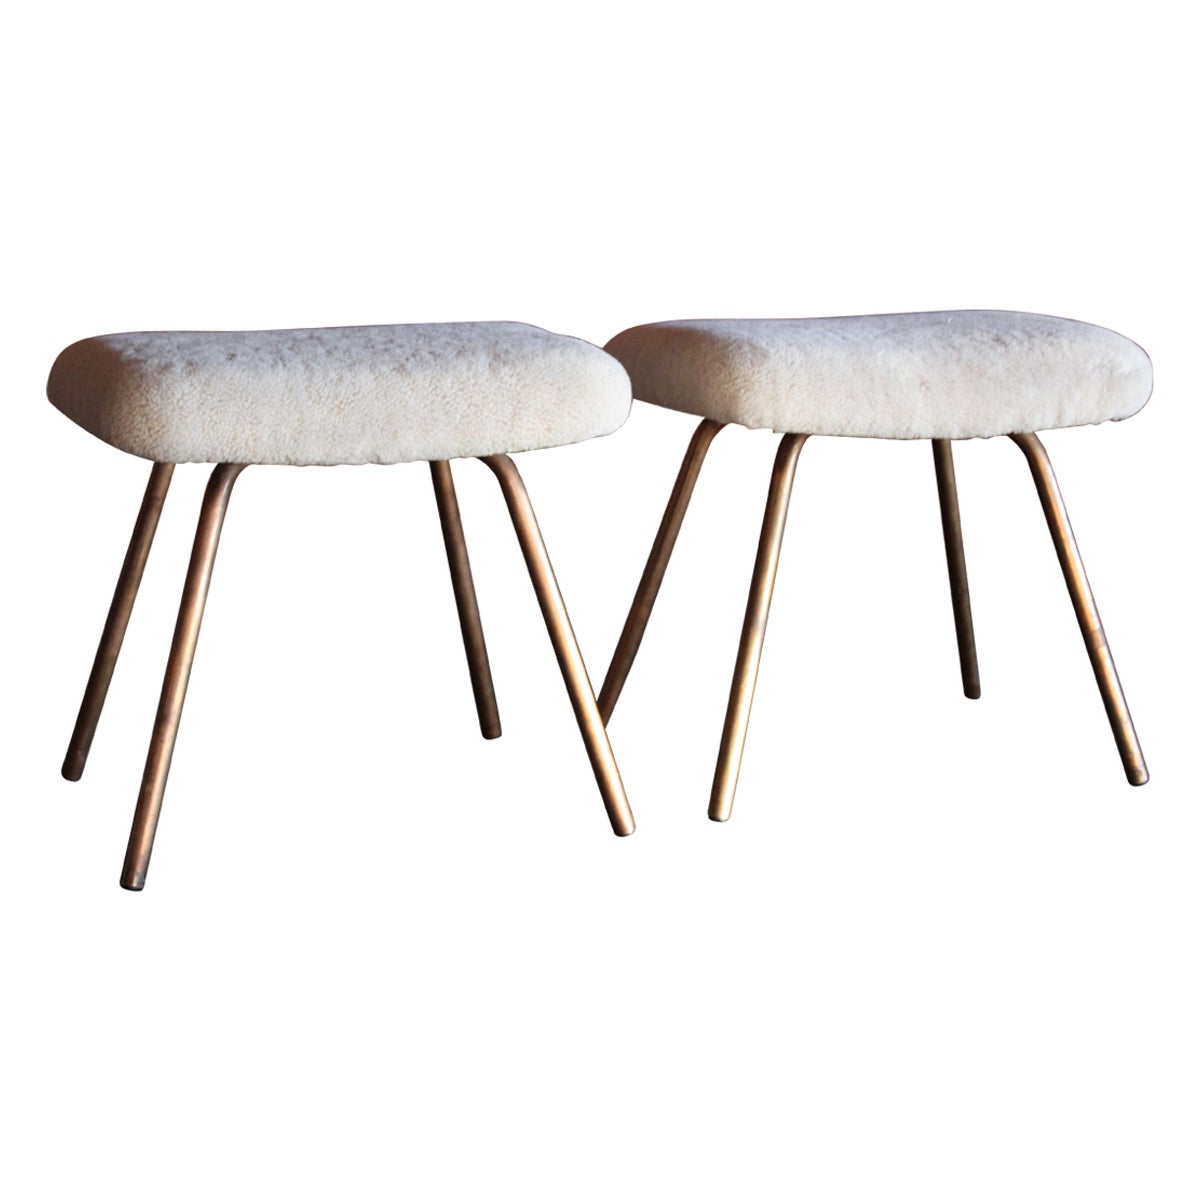 Pair of Prototype Copper & Sheepskin Stools by Pierre Guariche, France, 1950s